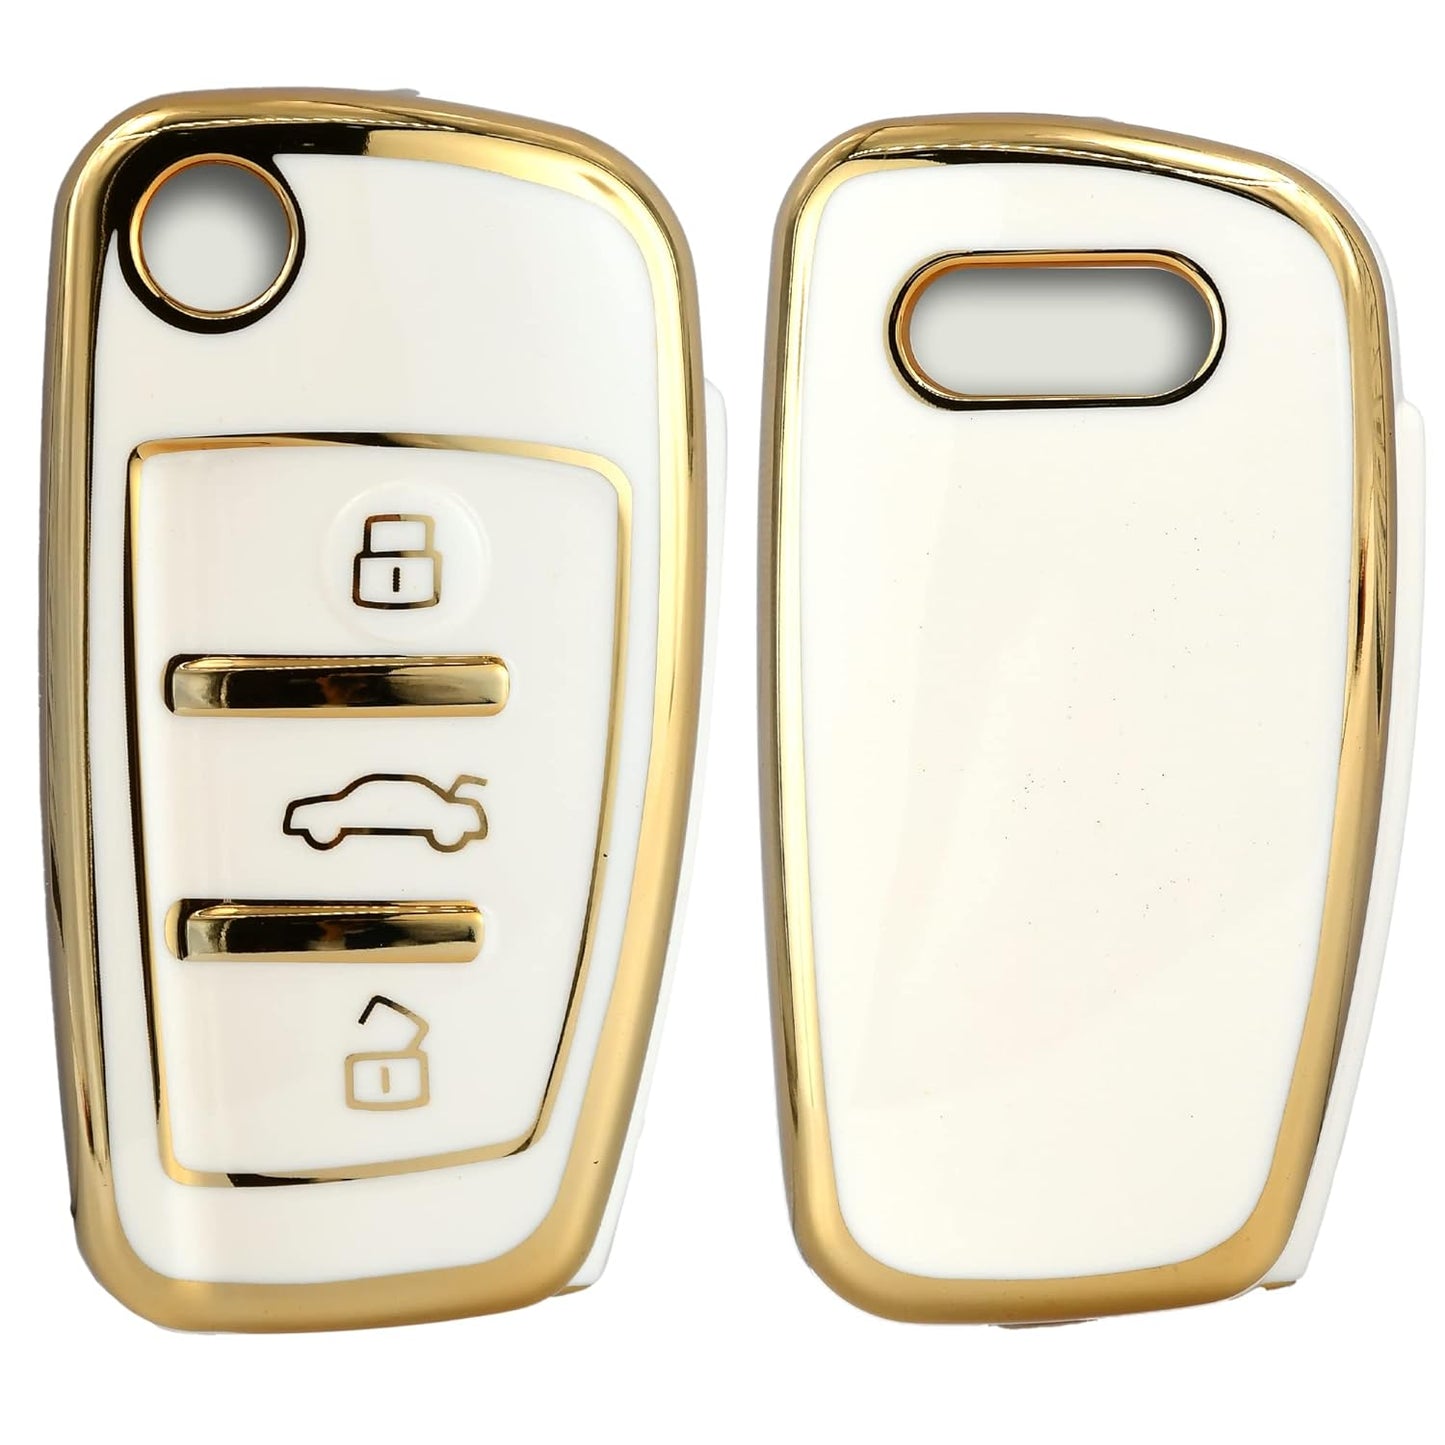 
                  
                    KMH TPU Gold Car Key Cover Compatible with Audi A1 A3 A6 Q2 Q3 Q7 TT TTS R8 S3 S6 RS3 Smart Key Cover (Pack of 2, White)-TPU GOLD KEY COVER-KMH-CARPLUS
                  
                